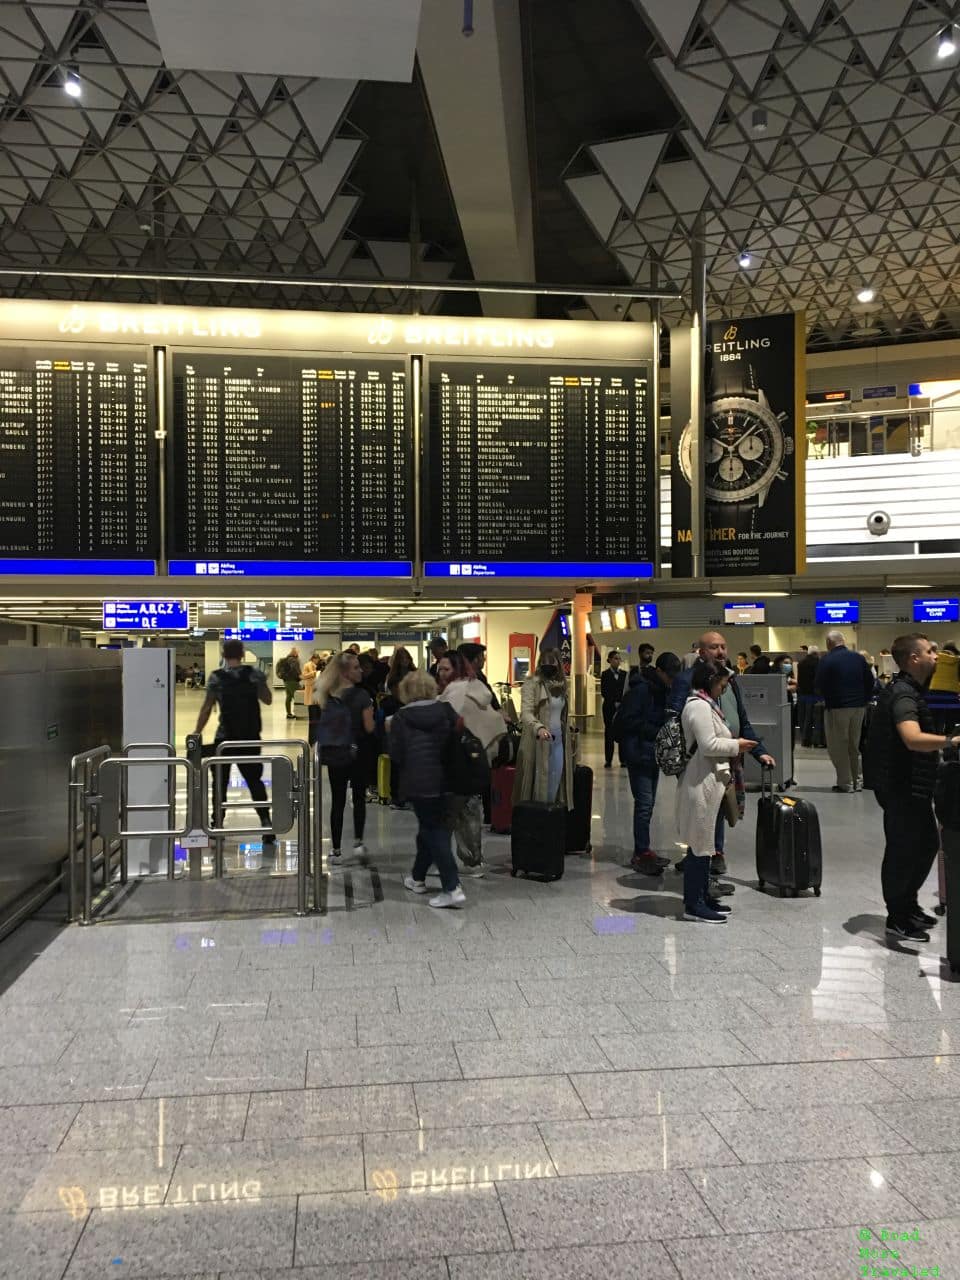 Singapore Airlines Economy check-in line at FRA